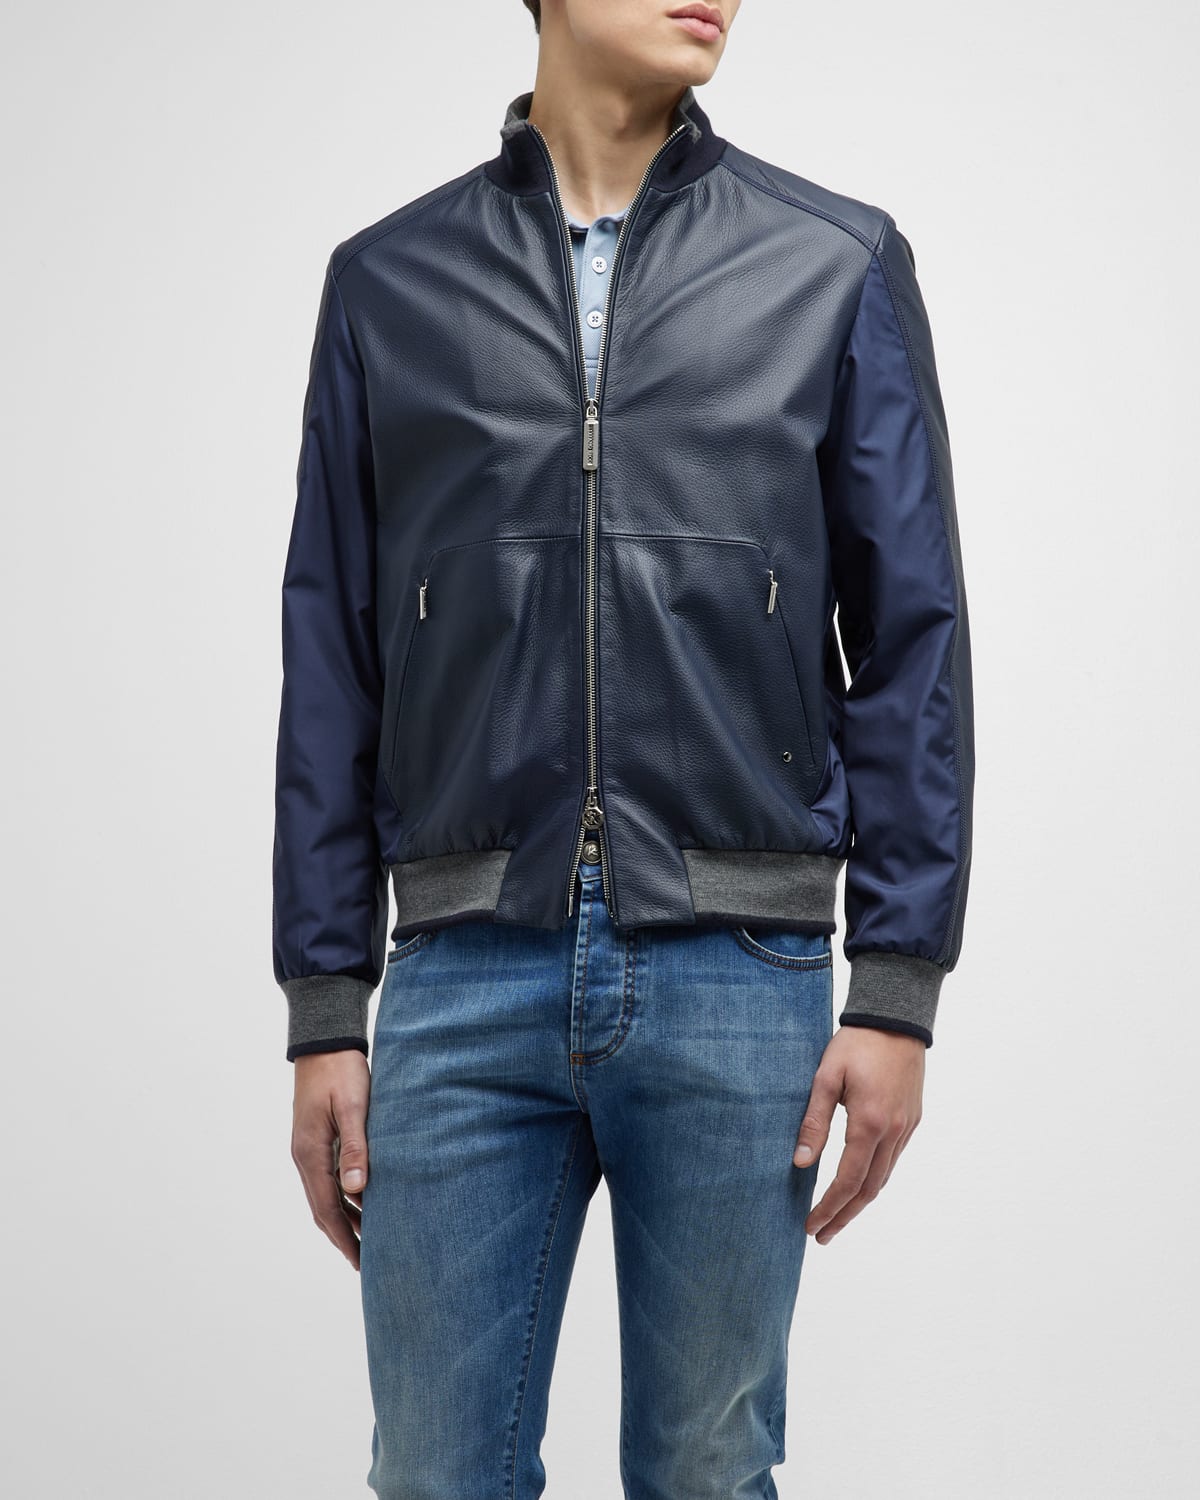 Men's Leather and Silk Bomber Jacket